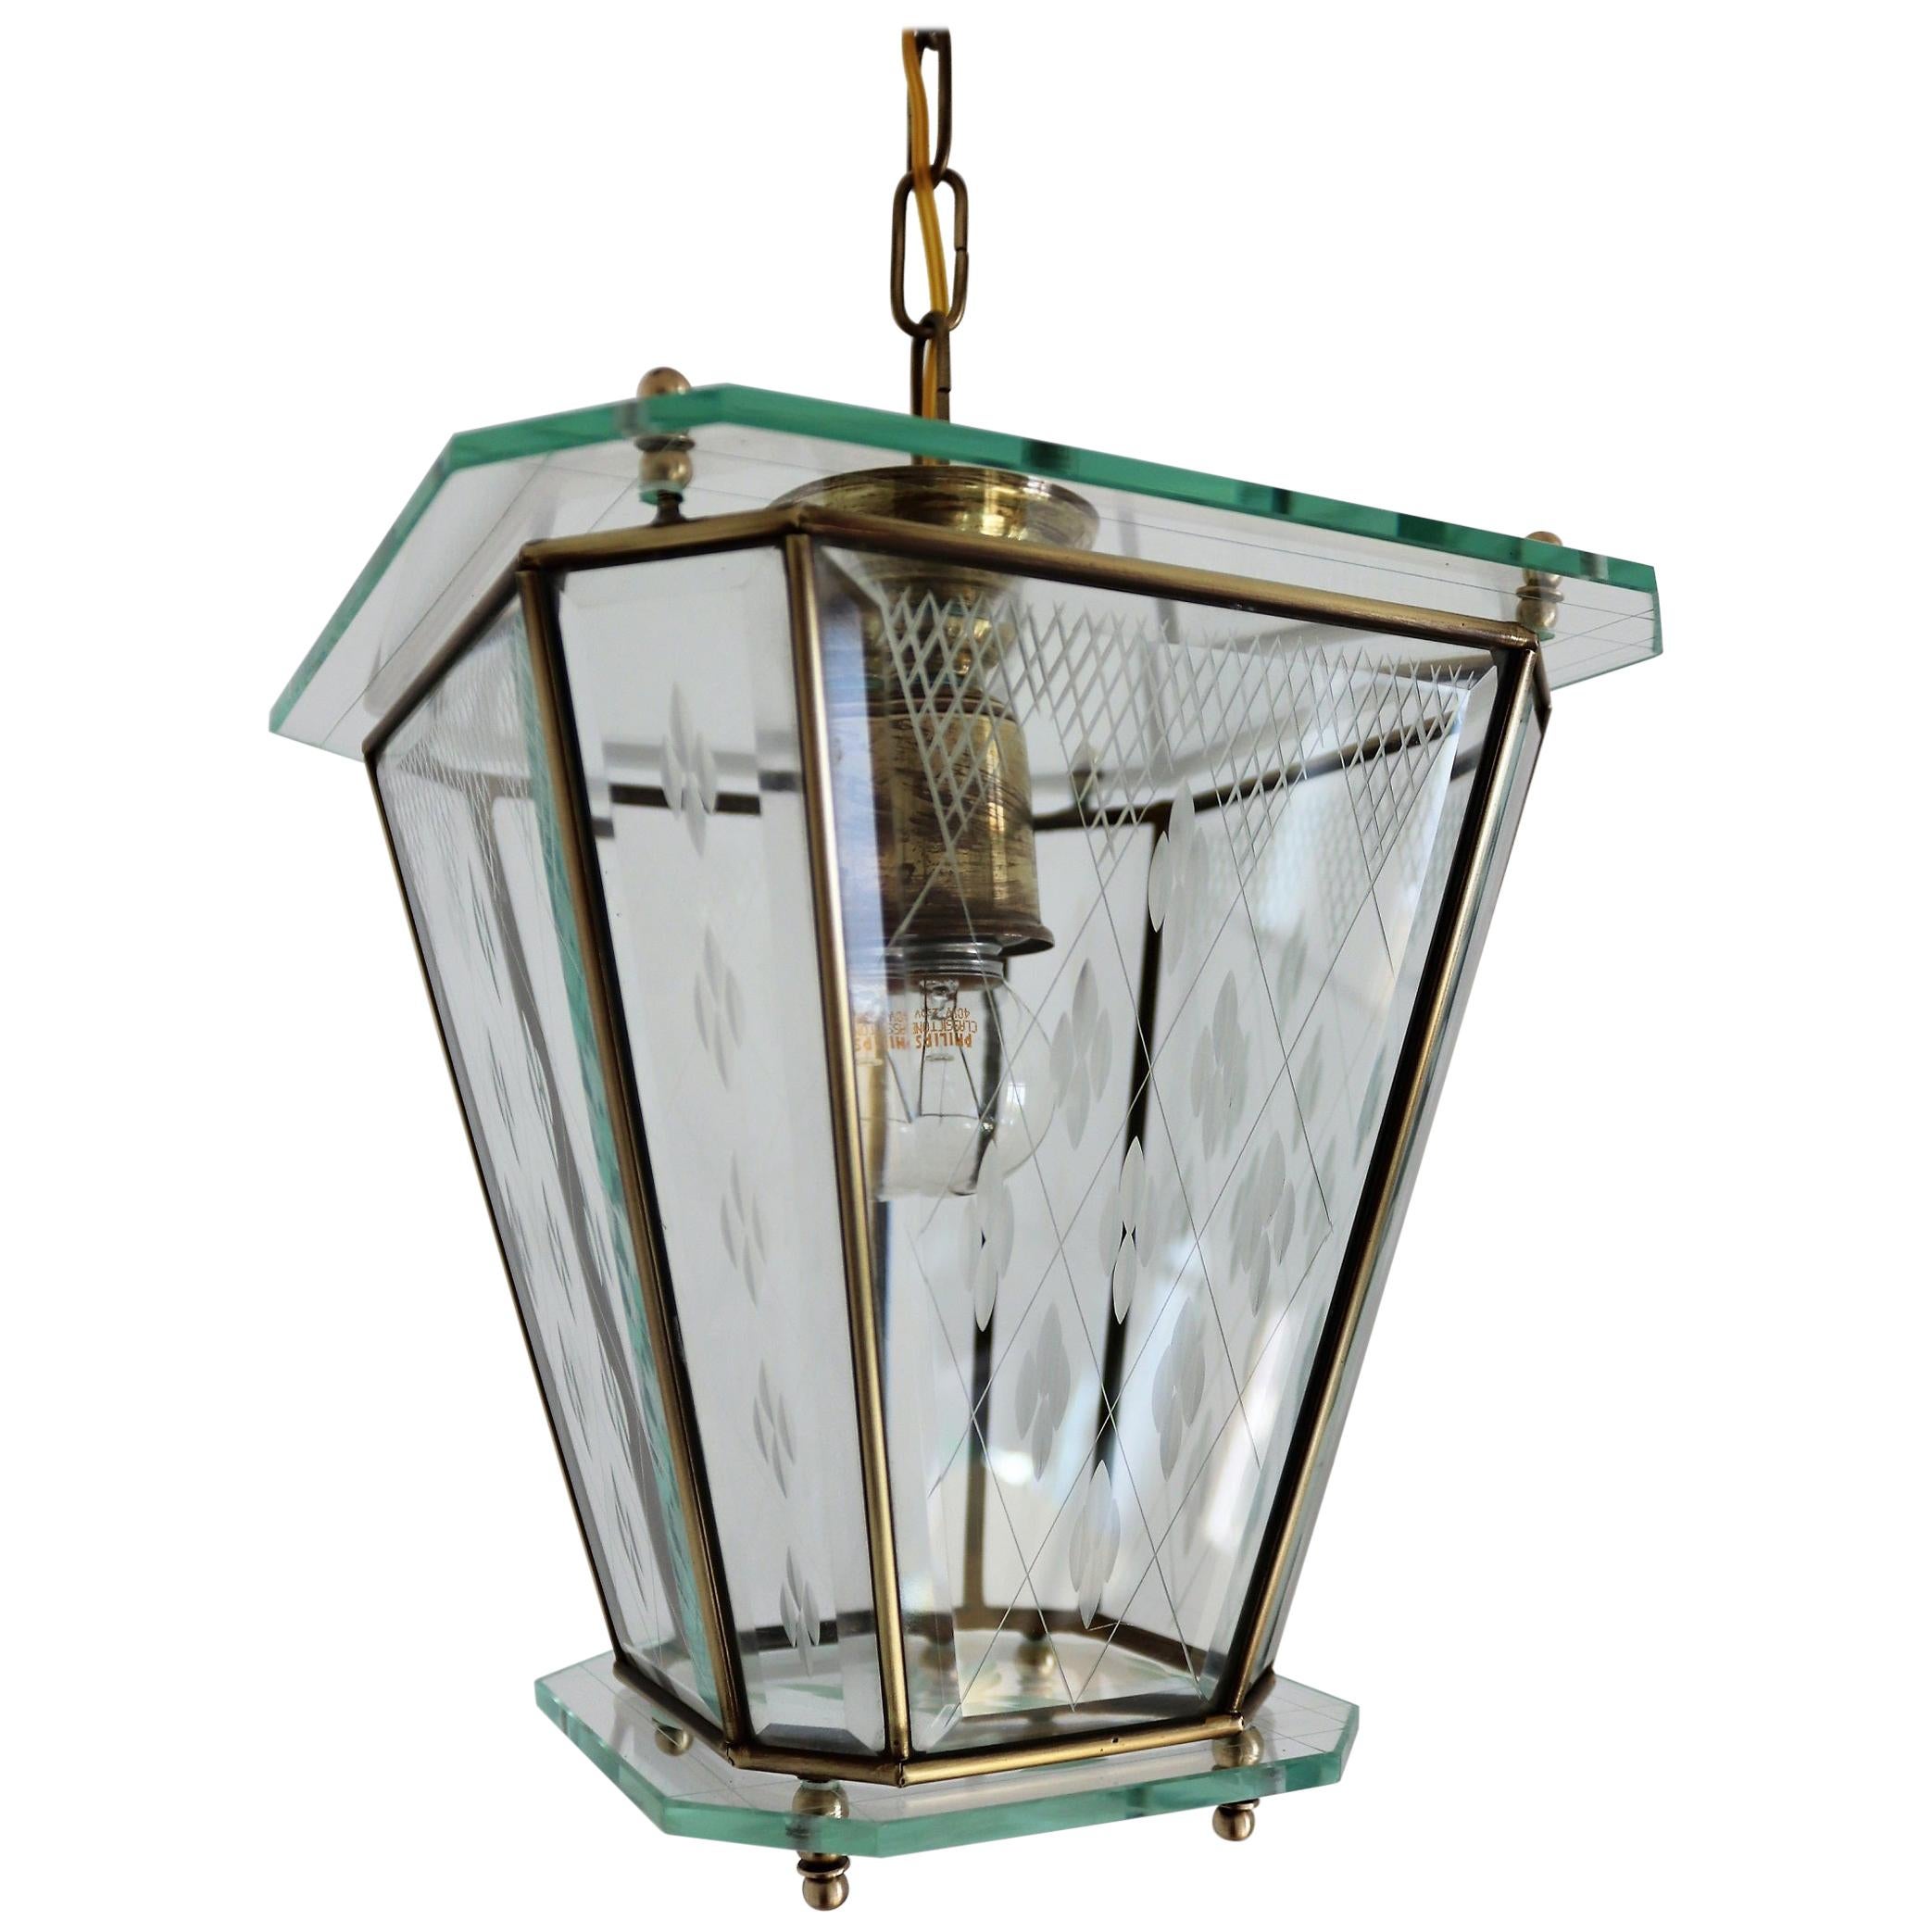 Italian Vintage Lantern in Crystal Cut Glass and Brass, 1950s